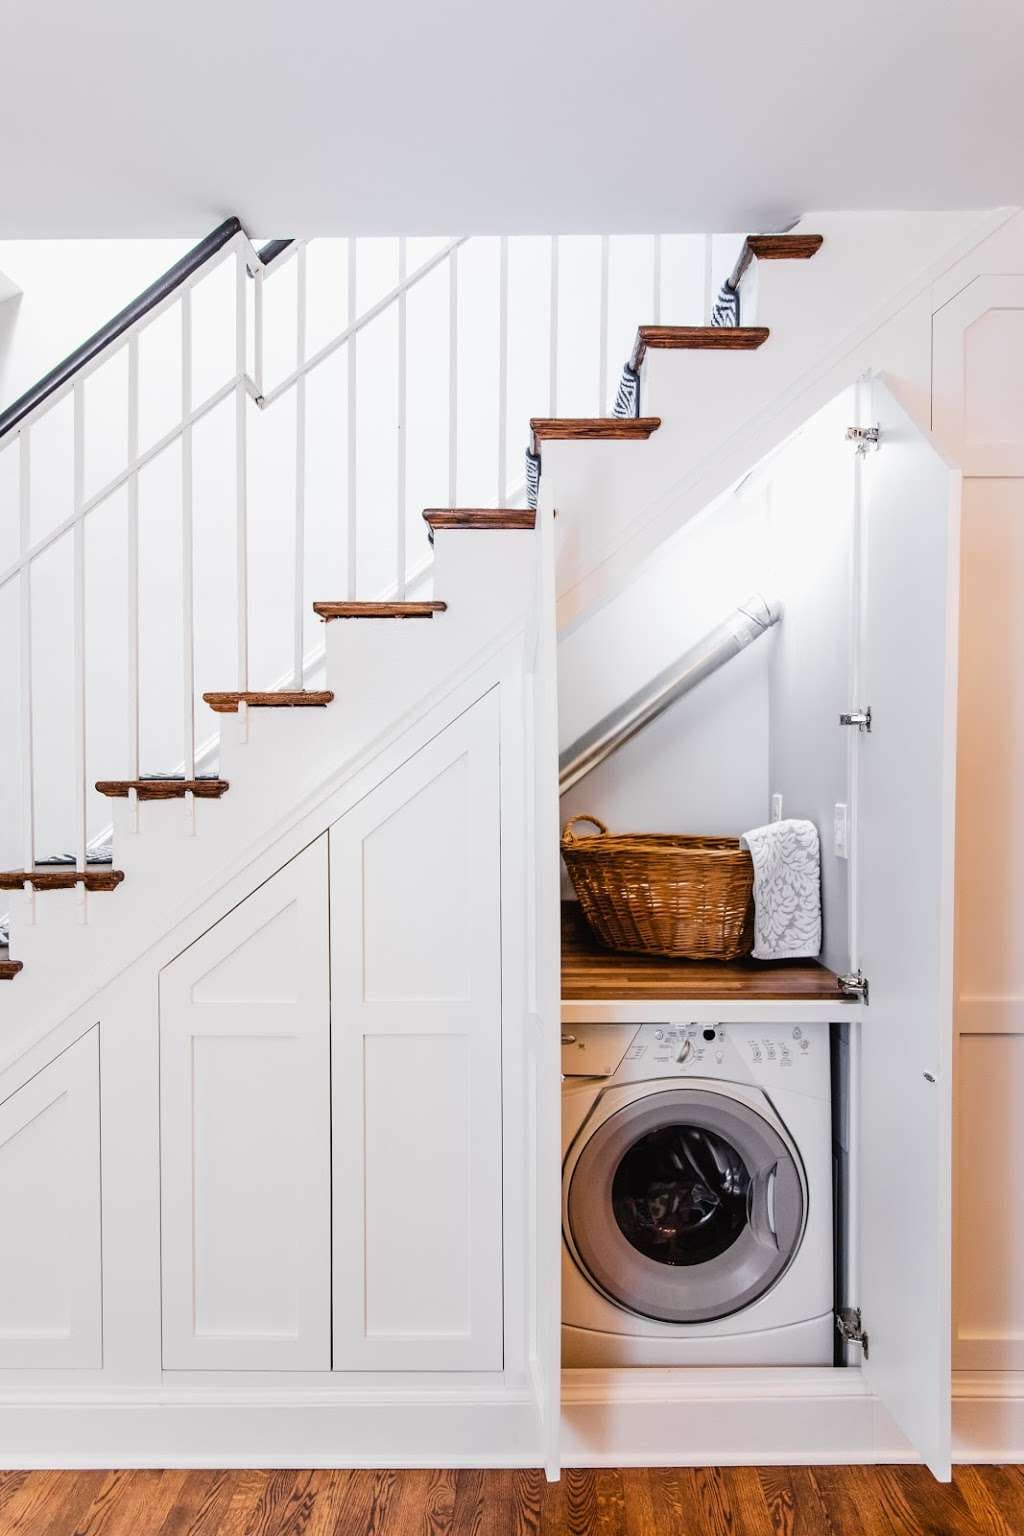 30 awesome understair ideas to add to your bag - 109